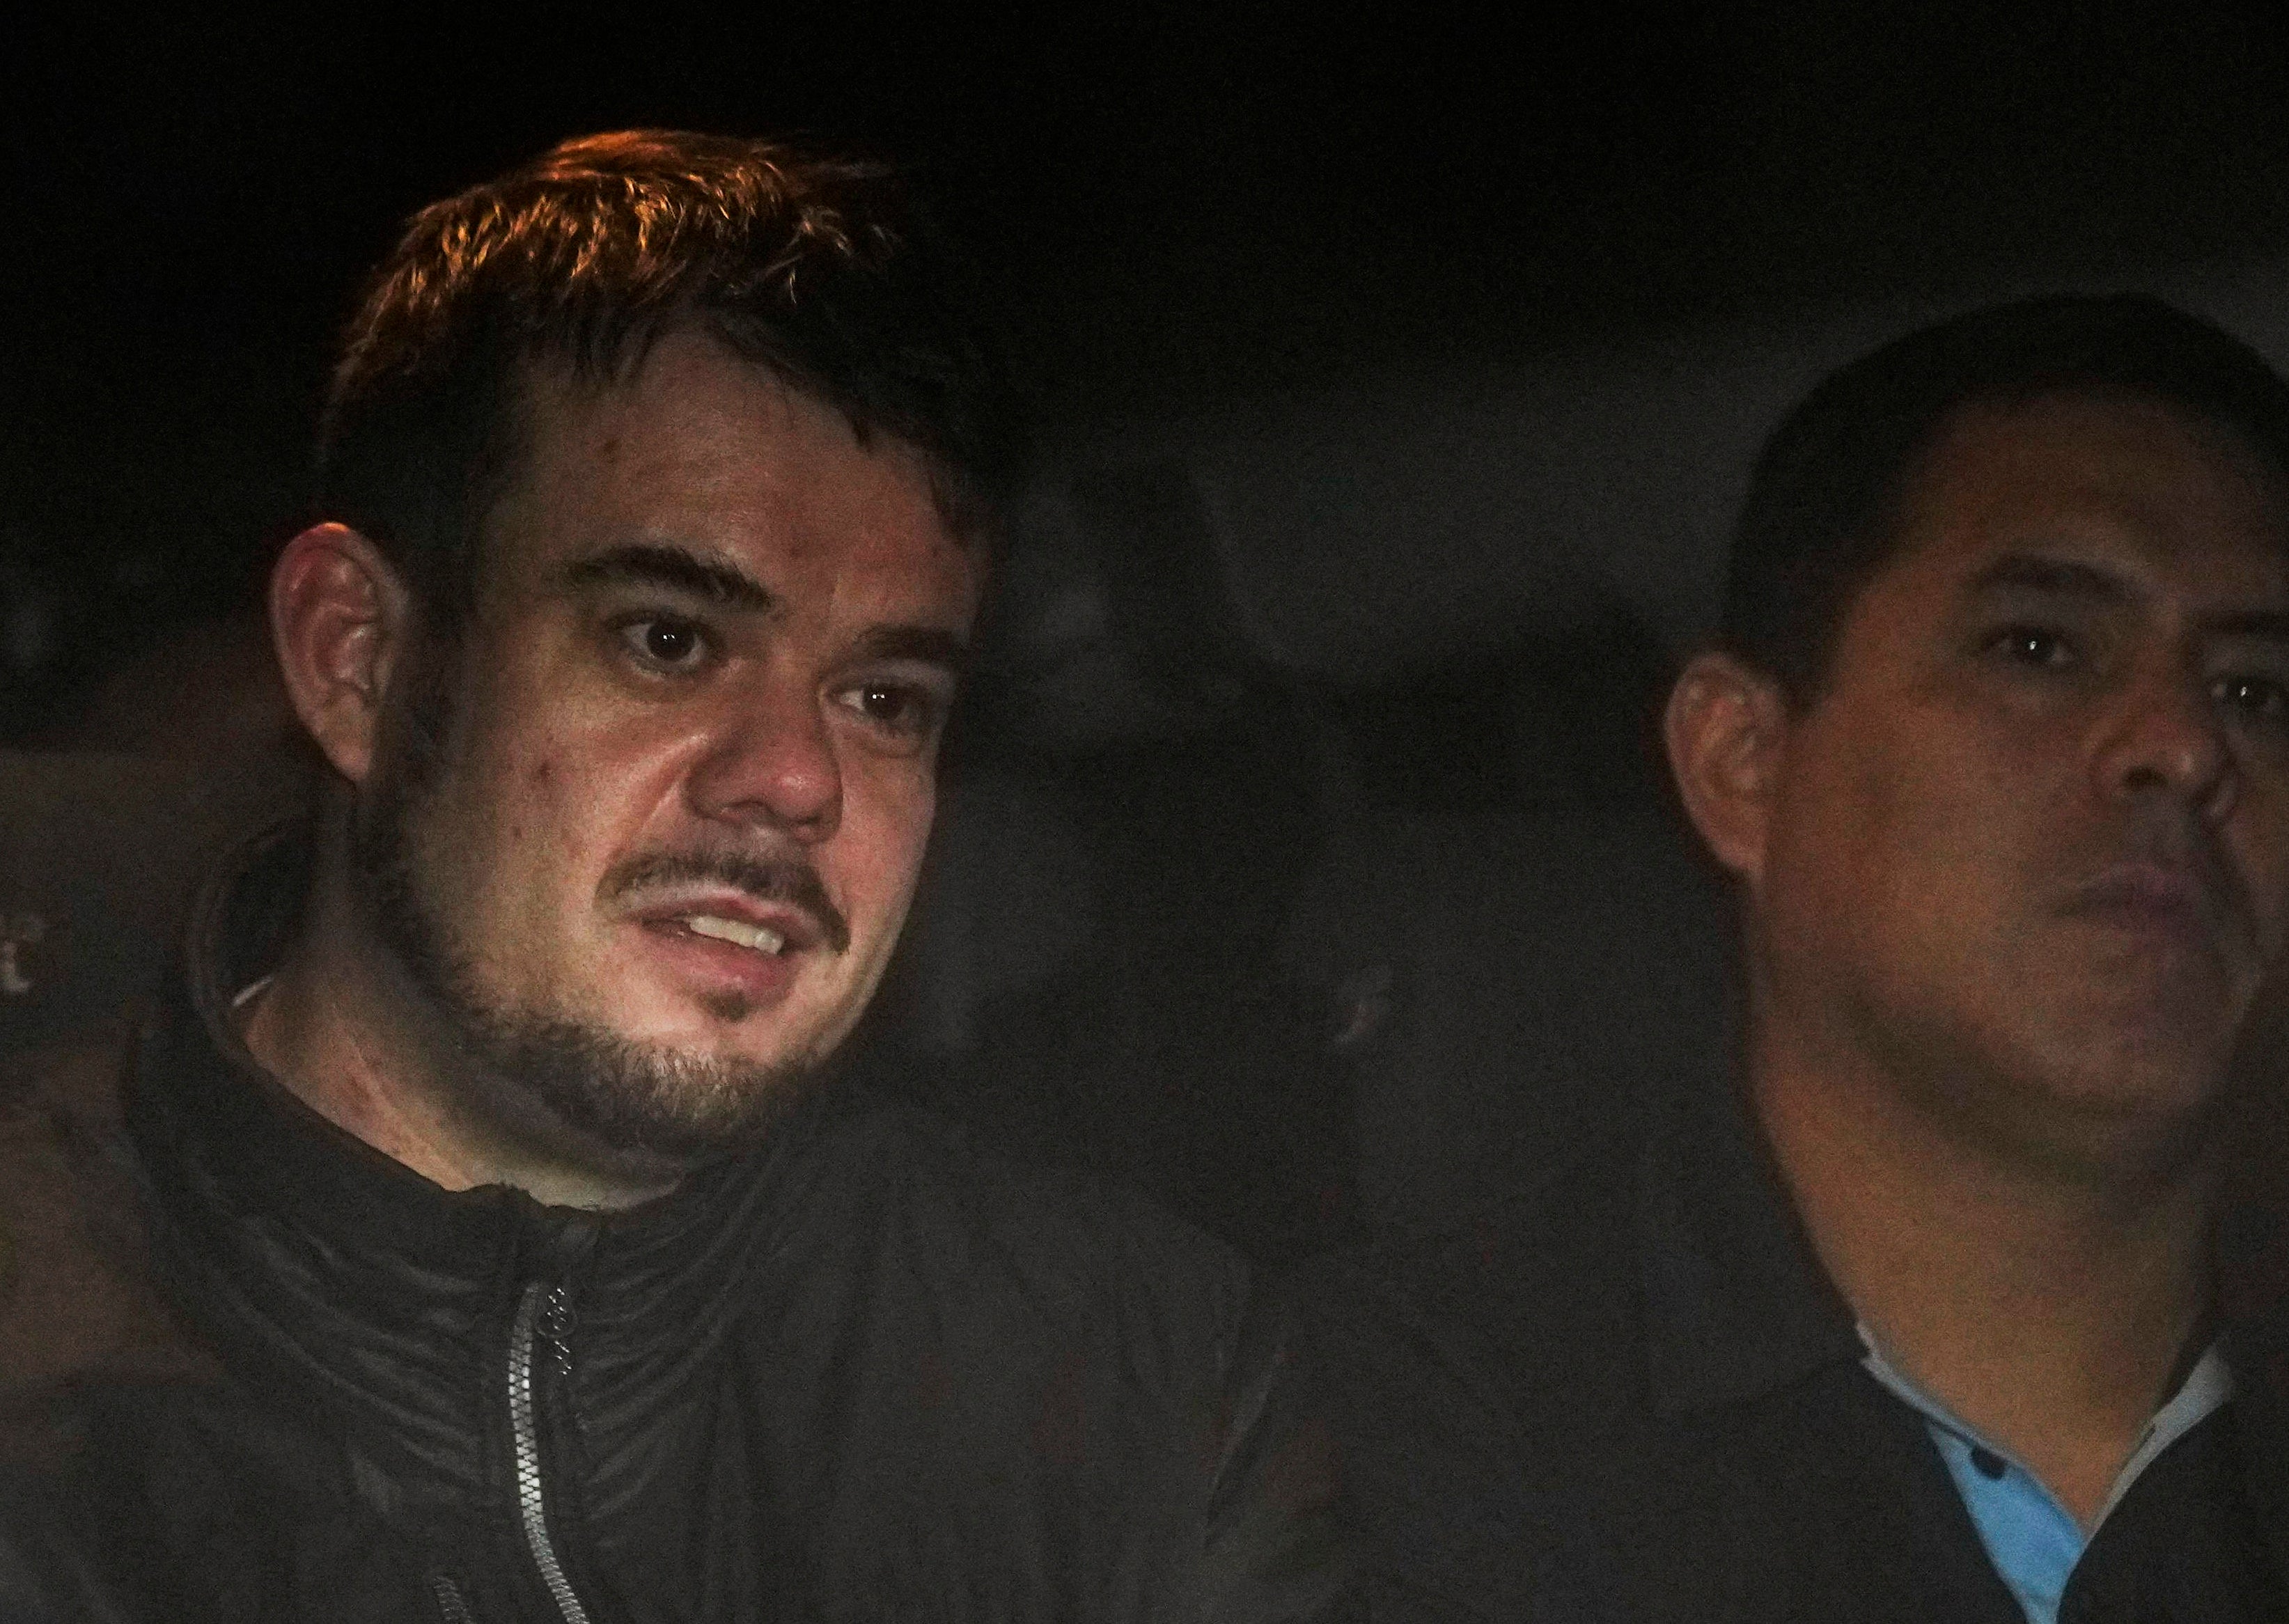 Dutch citizen Joran van der Sloot is pictured being extradited from Peru to the US earlier this year